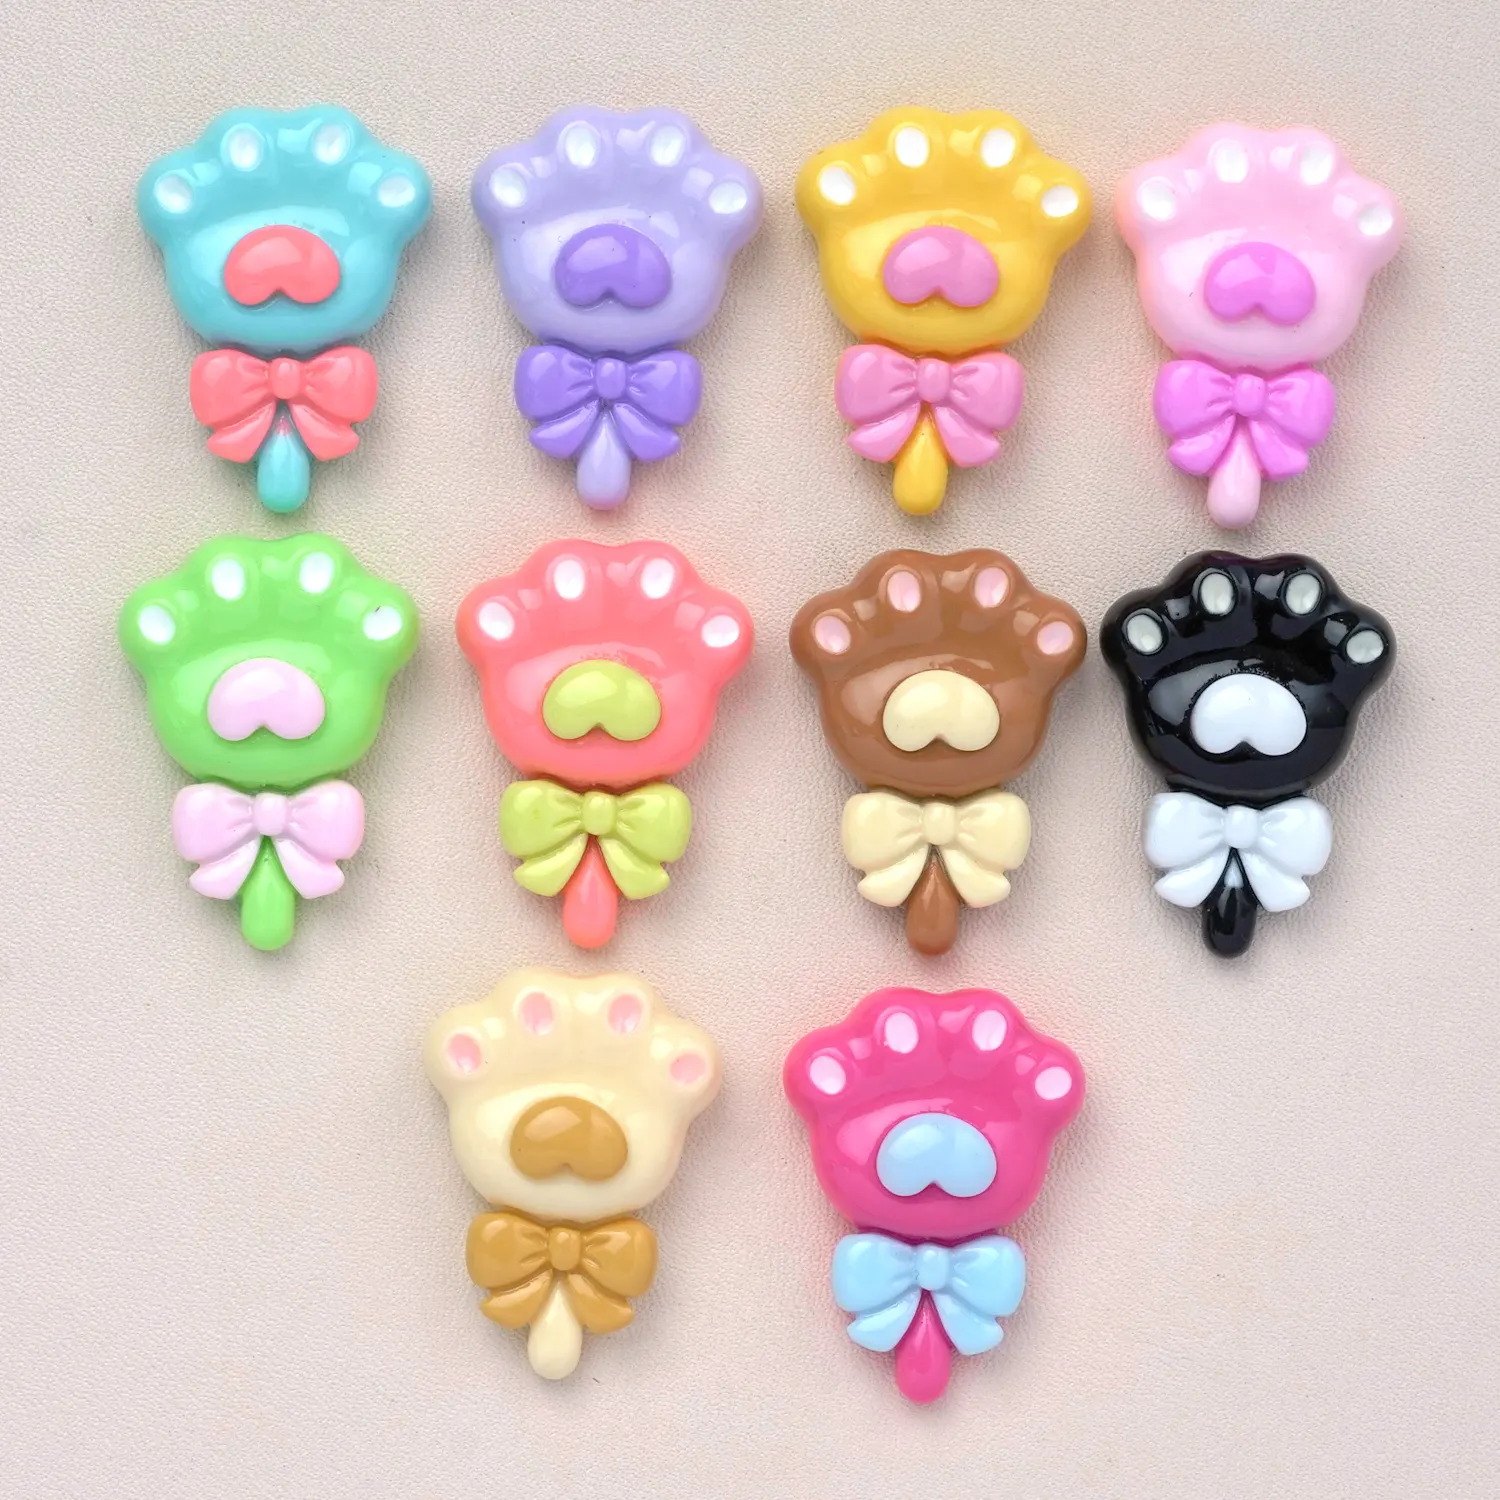 Kawaii colorful cat claw popsicle flatback resin crafts for phone case DIY key chain pendant hair clips making party decoration